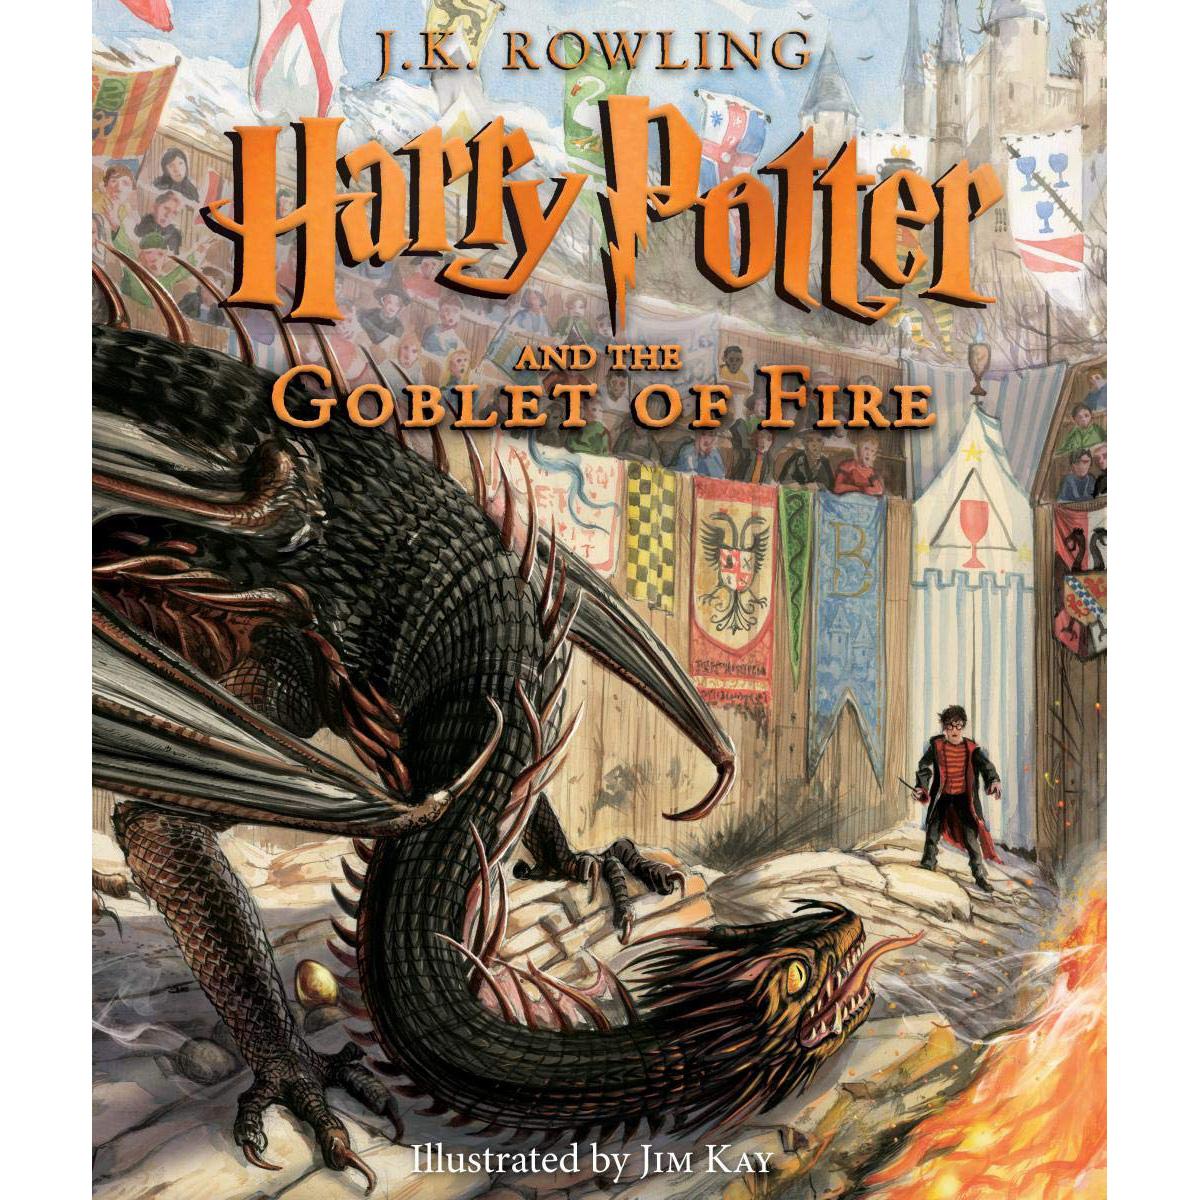 Harry Potter and the Goblet of Fire The Illustrated Edition Book for $15.11